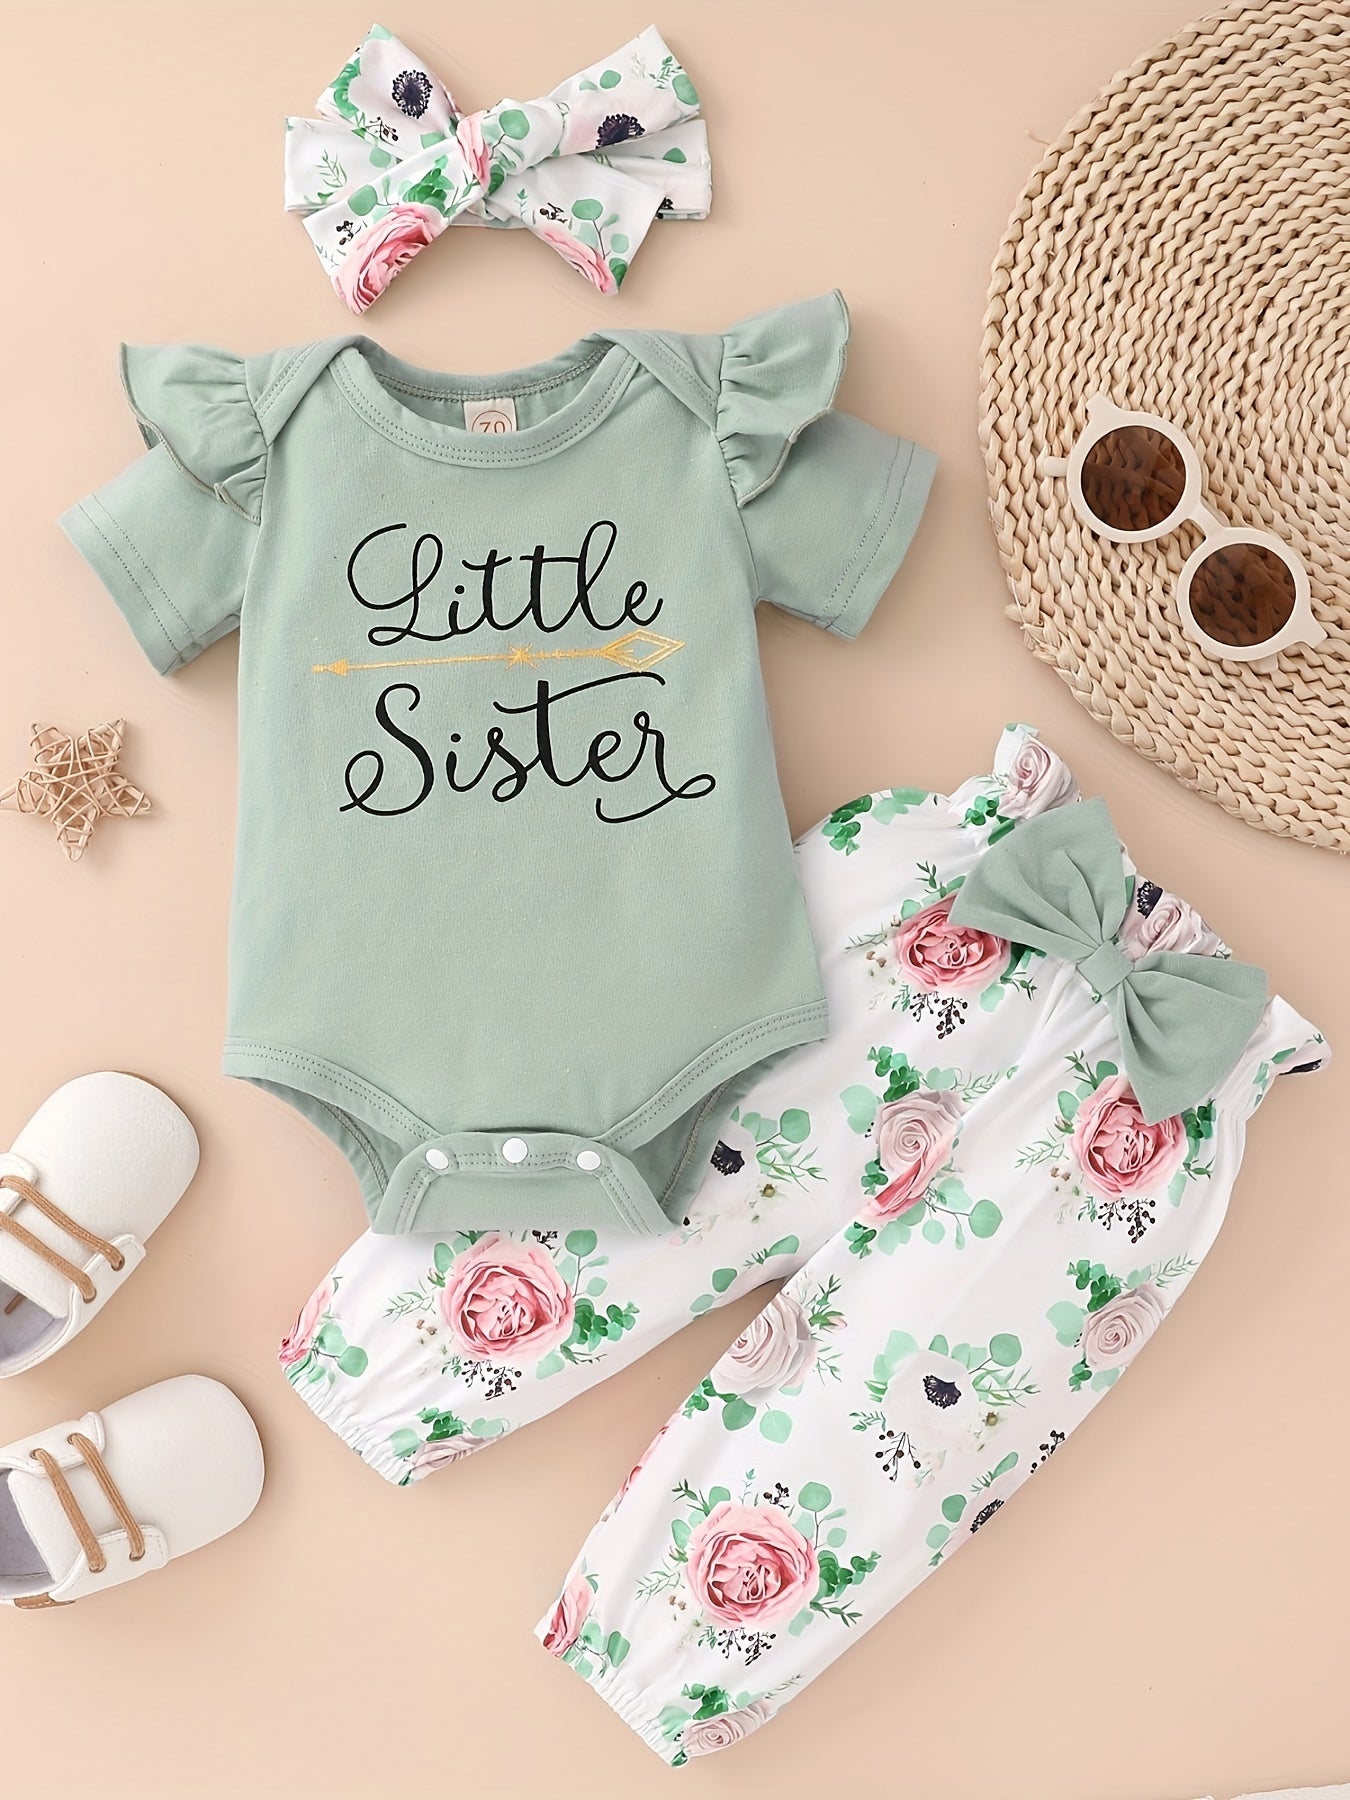 Baby Girls Cotton Short Sleeve Bodysuit Romper + Matching Floral Print Pants + Headband Baby Clothes Summer